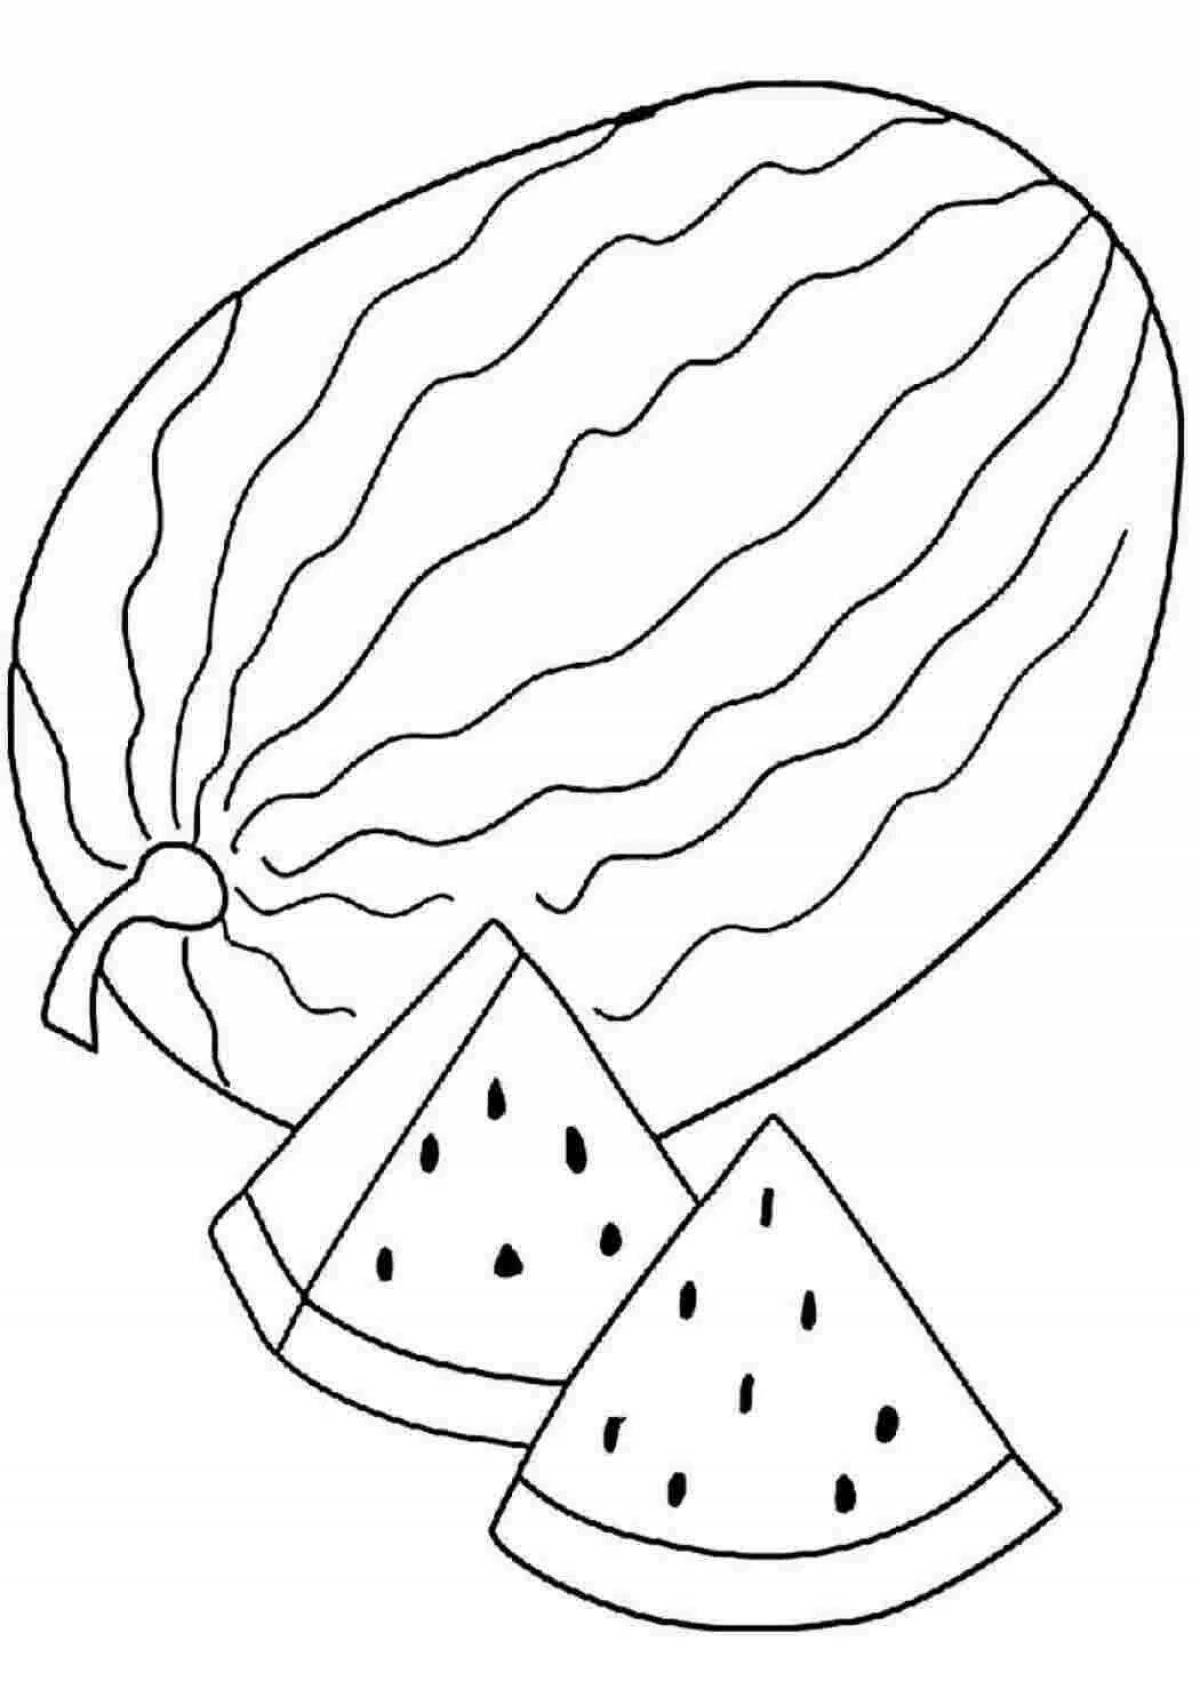 Stimulated watermelon coloring page for pre-k